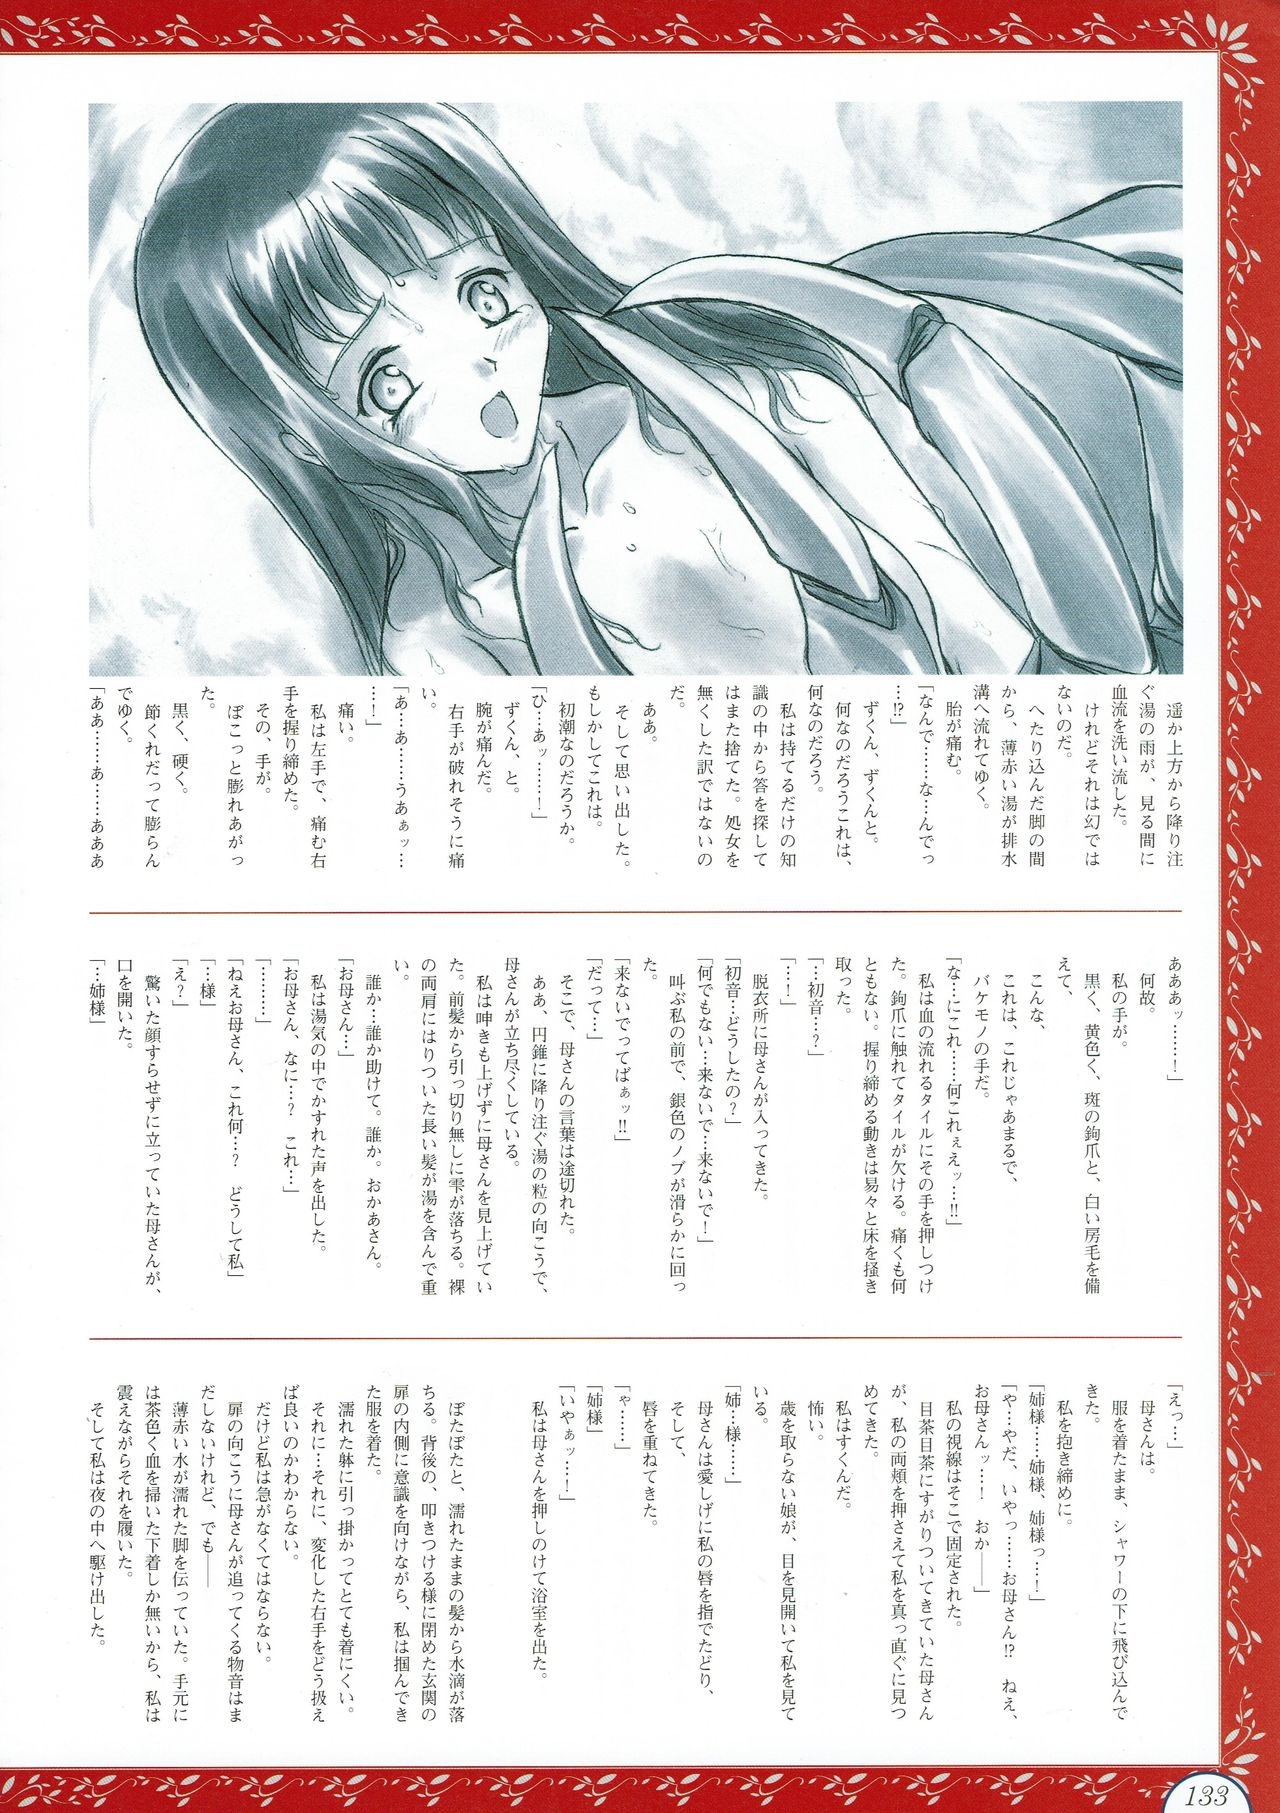 Alice no Yakata 456 Official Guide 134